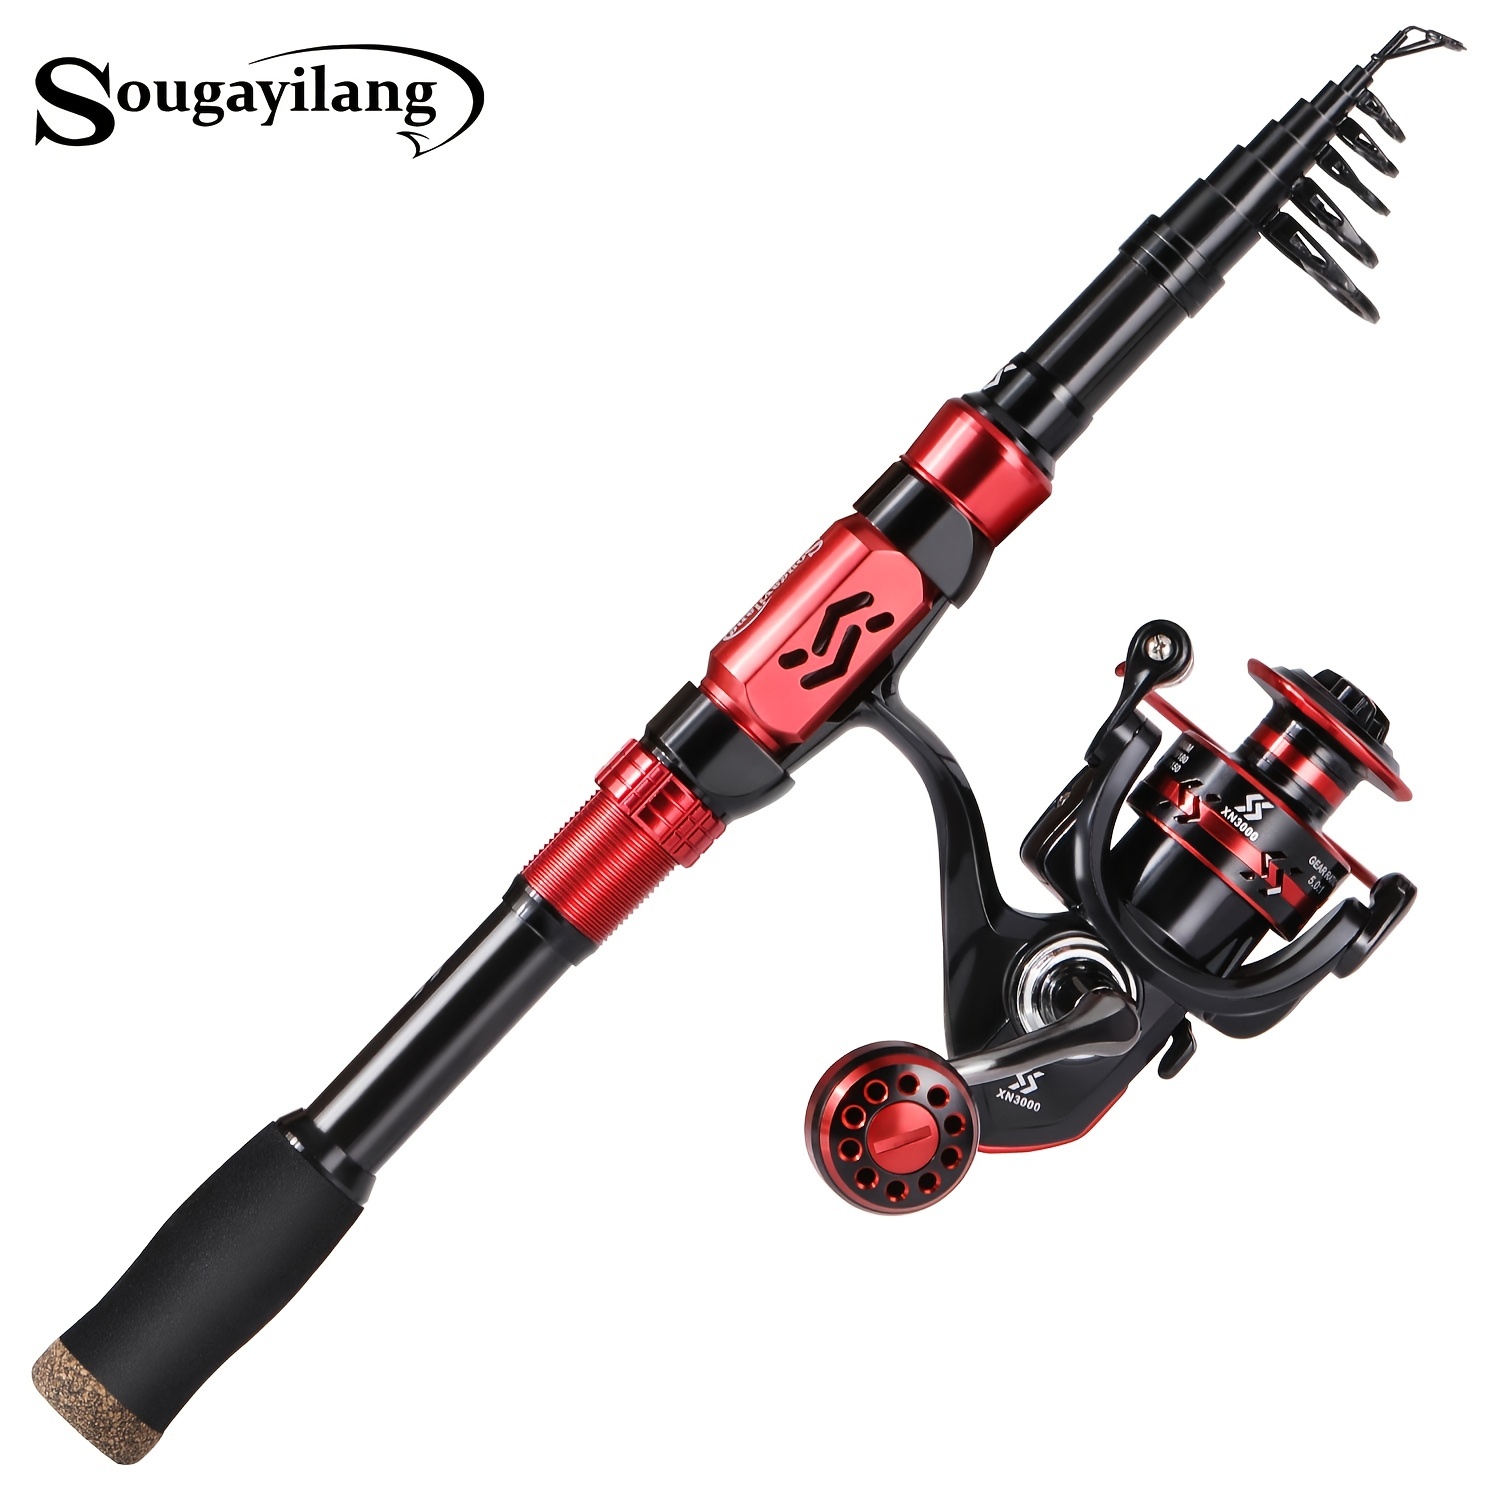 Sougayilang Telescopic Fishing Rod and Reel Combo - 12+1BB Spinning Reel  for Saltwater and Freshwater Fishing, Ideal for Travel and Easy Storage